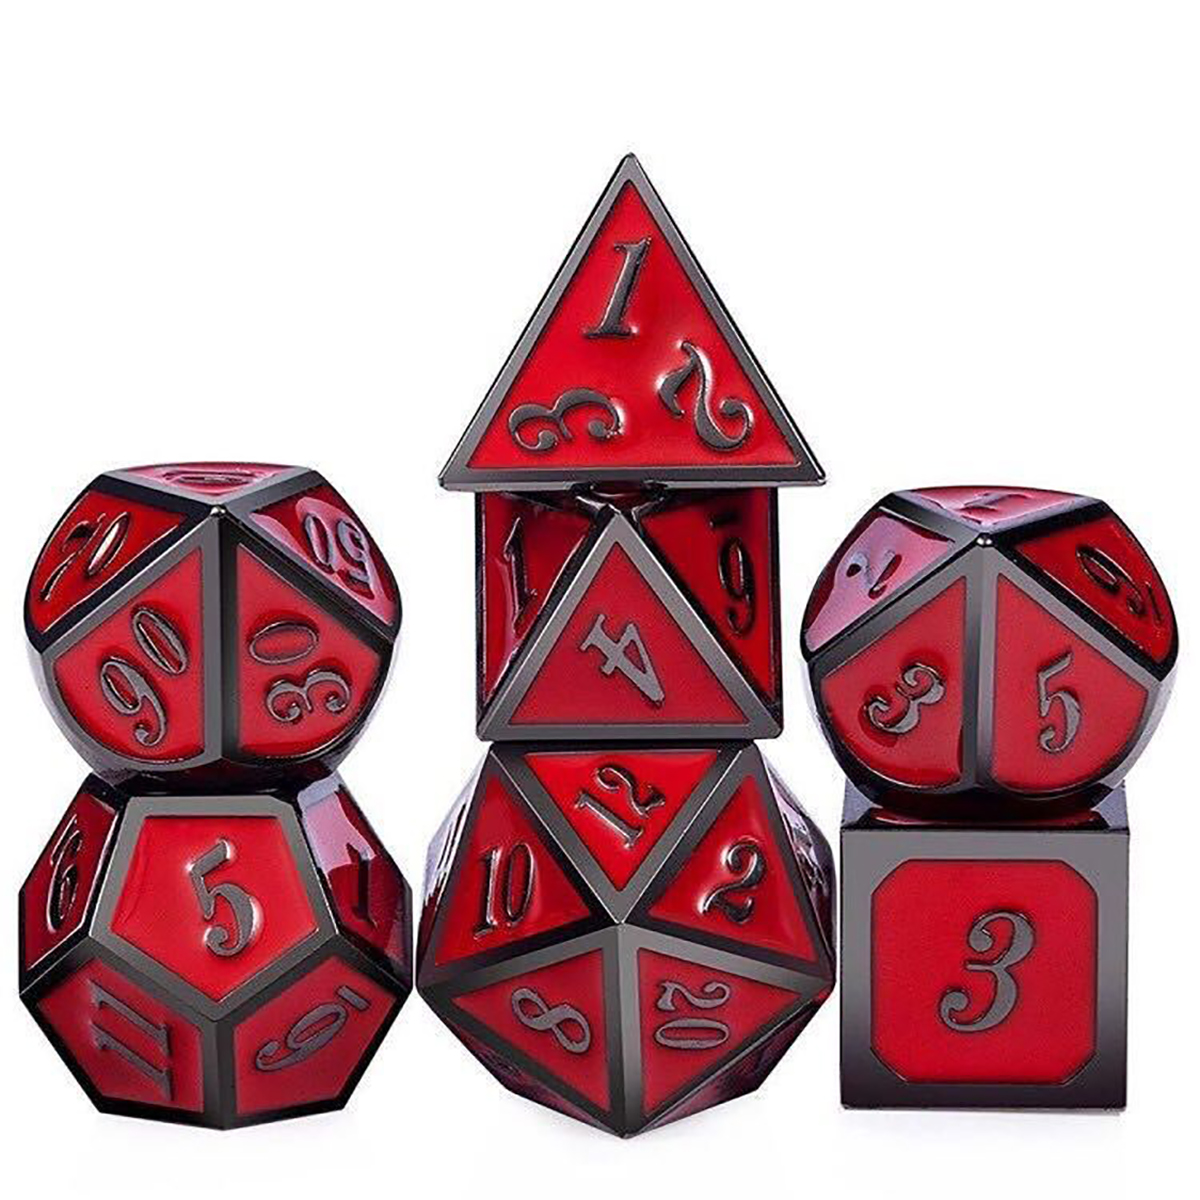 7-PcsSet-Metal-Dice-Set-Role-Playing-Dragons-Table-Board-Game-Toys-With-Cloth-Bag-Bar-Party-Game-Dic-1672532-7